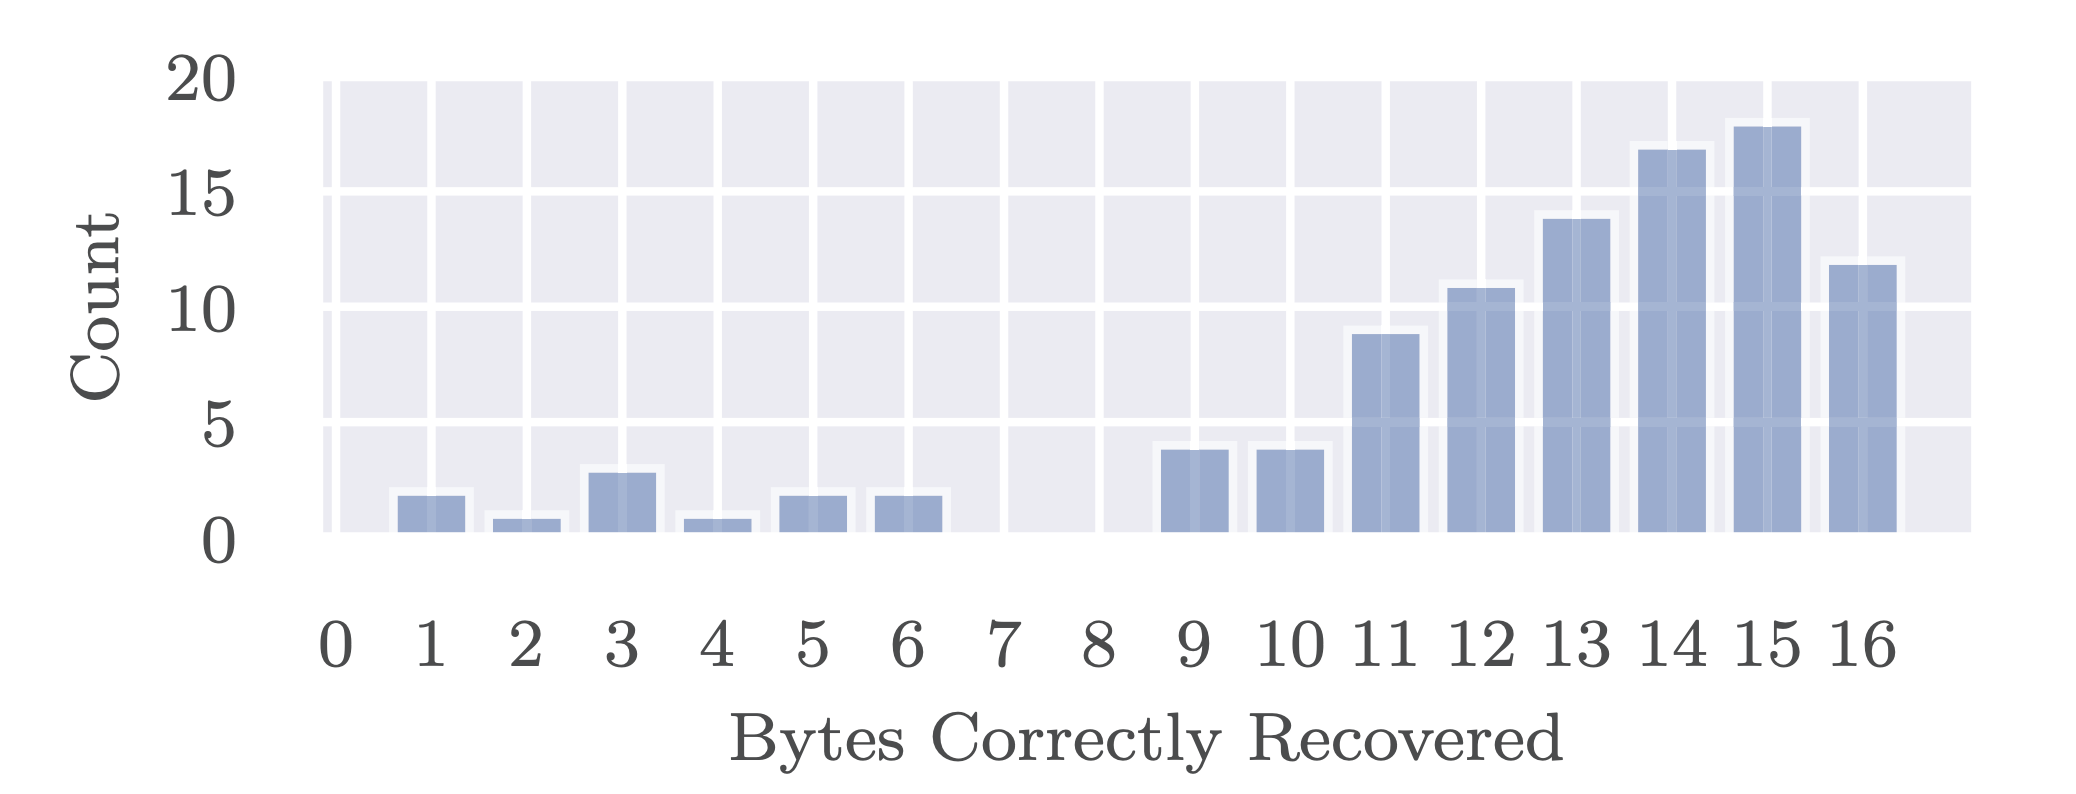 Bar graph of bytes correctly recovered using the team